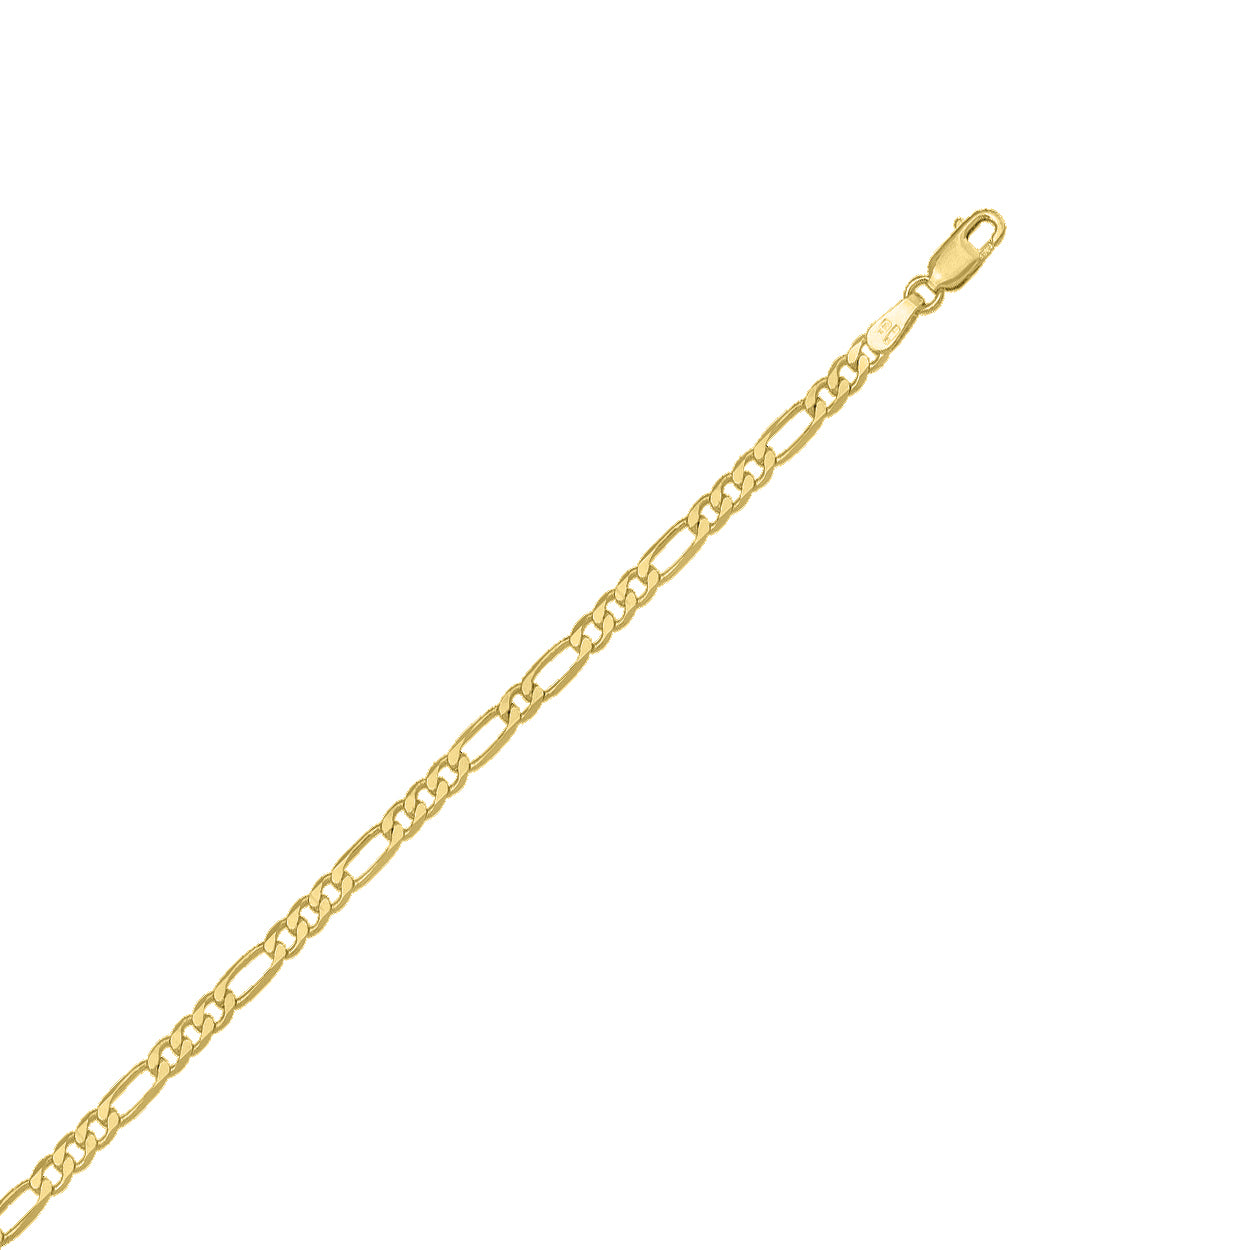 18kt Yellow Gold Figaro Style Bracelet with 3mm Width